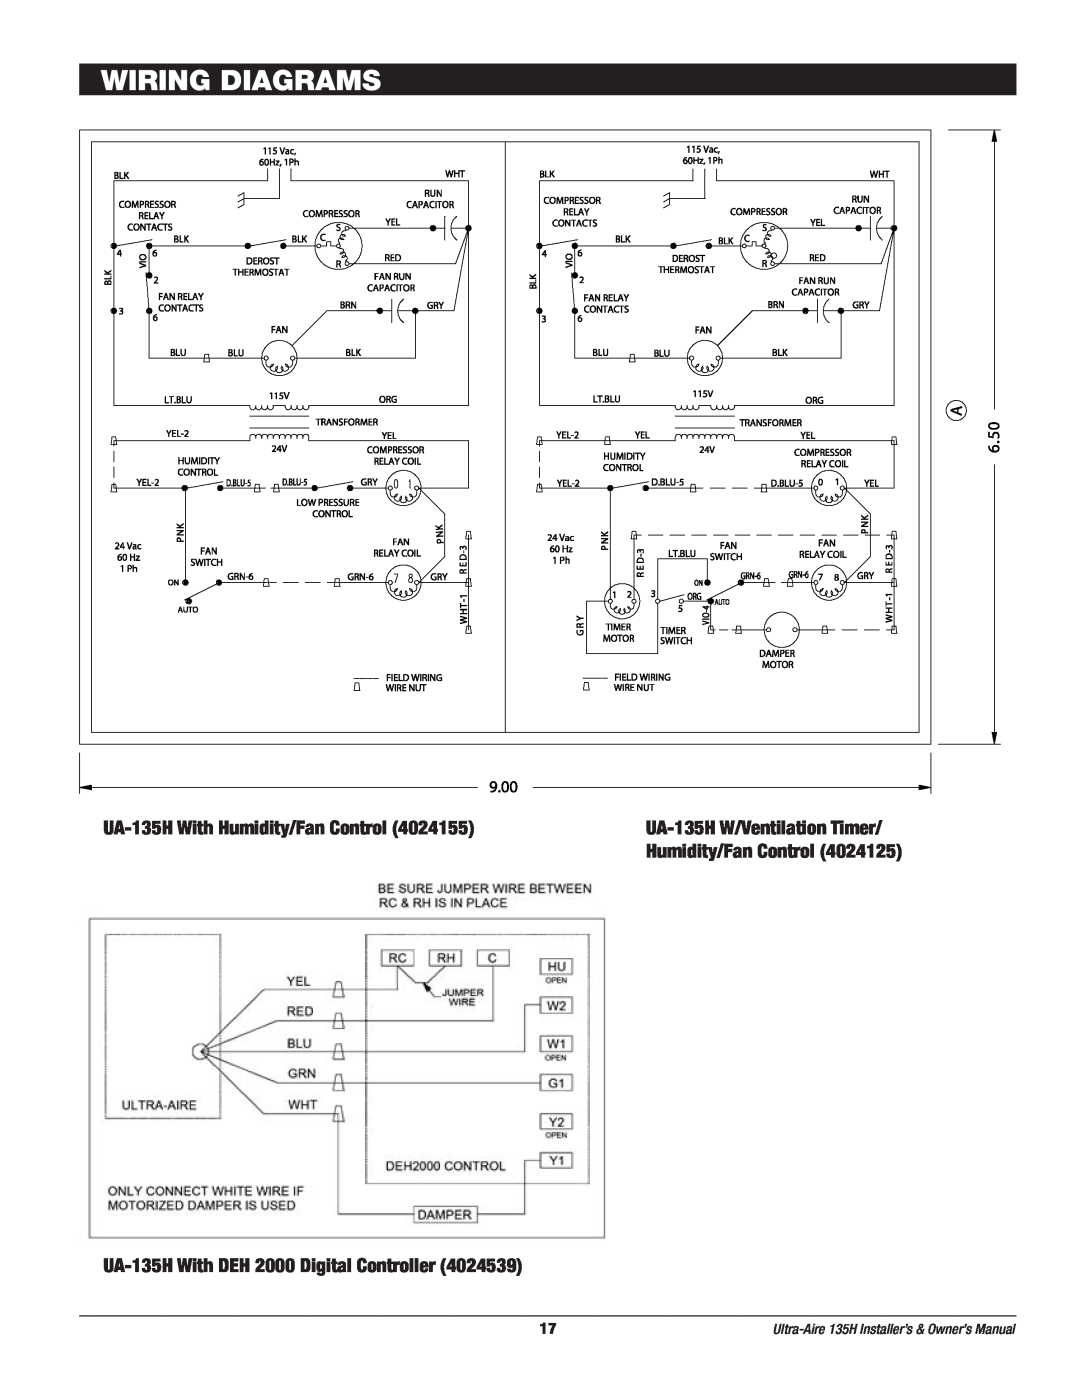 Therma-Stor Products Group Wiring Diagrams, UA-135HWith Humidity/Fan Control, UA-135HWith DEH 2000 Digital Controller 